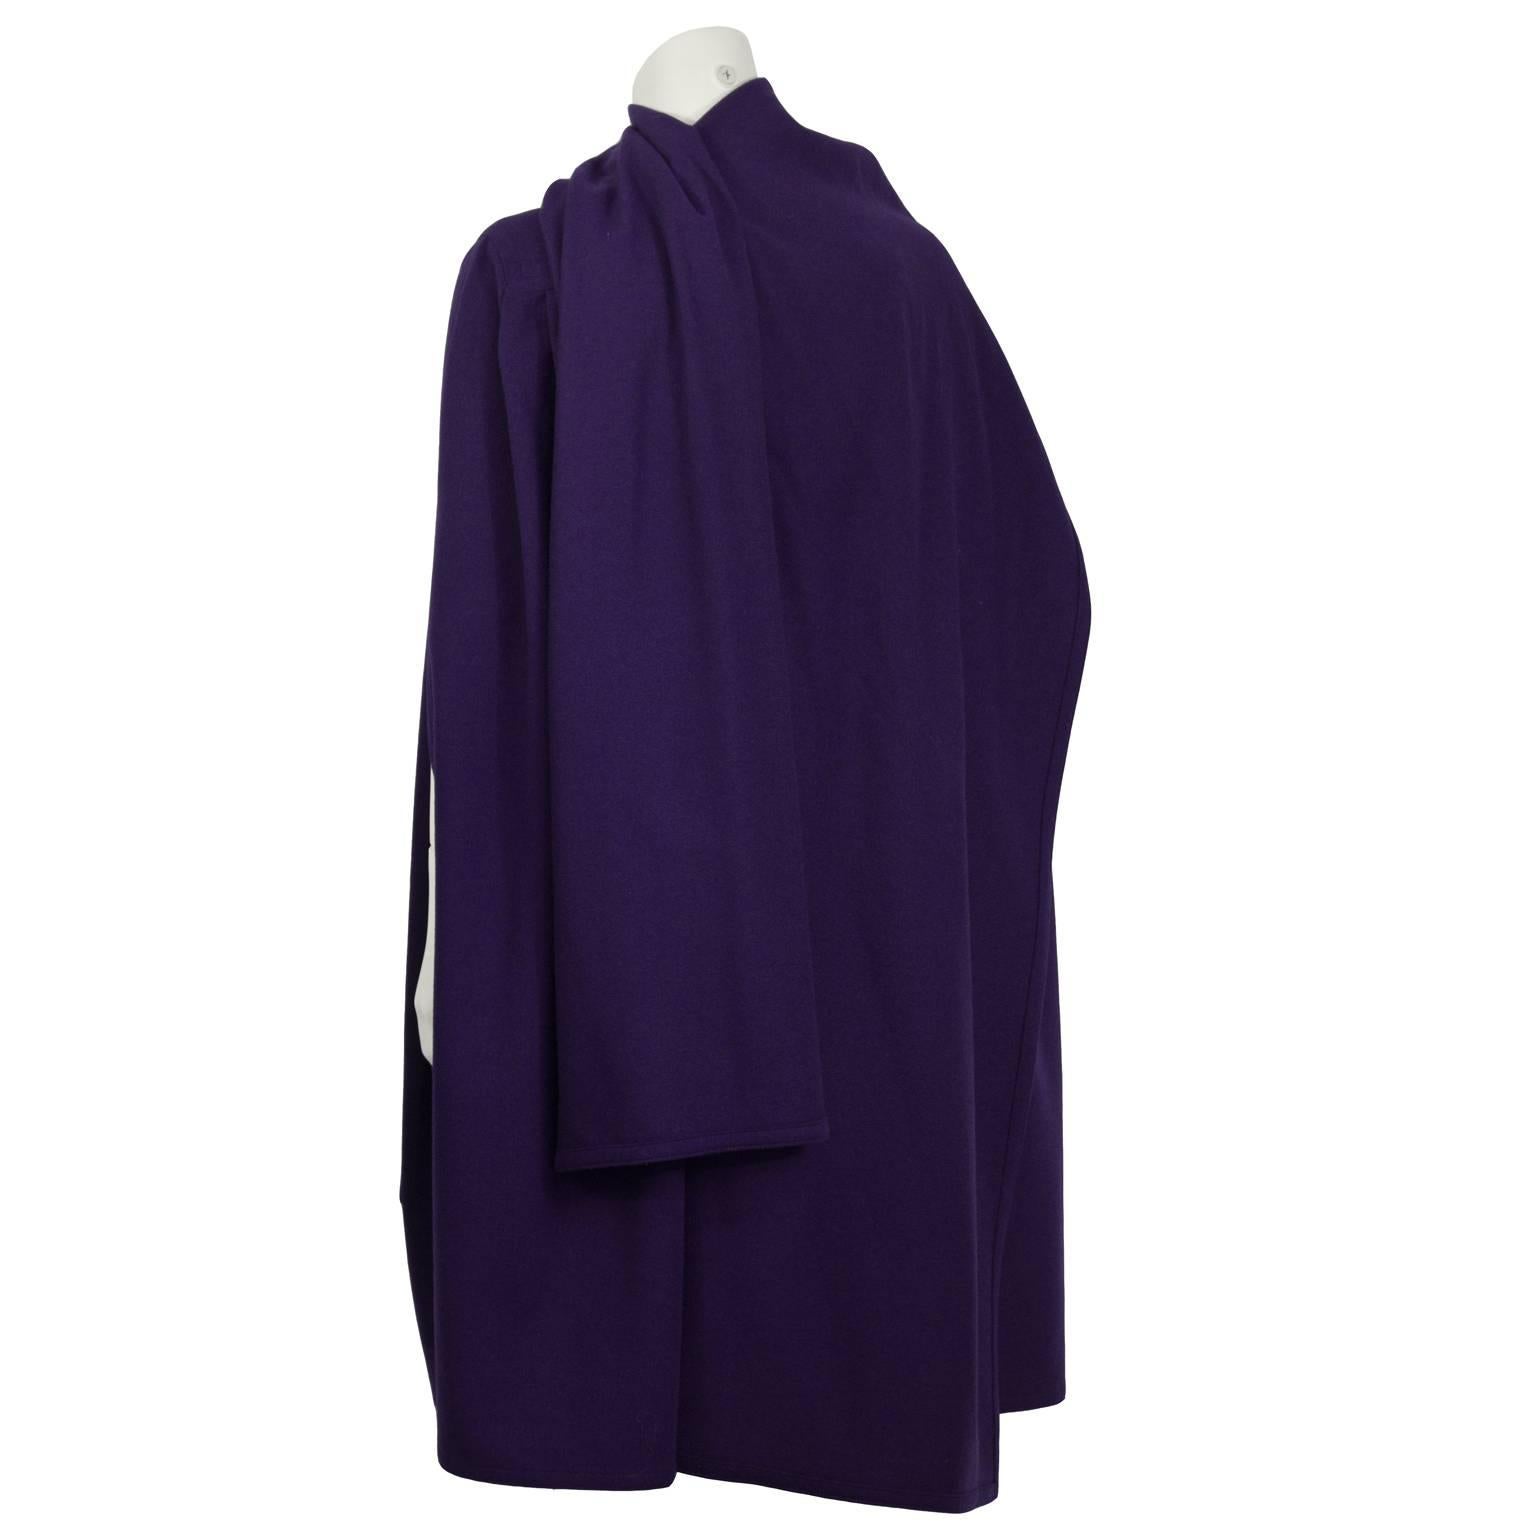 Add some color into your winter wardrobe with this elegant Scherrer cape with an attached shawl from the 1980s. Constructed with softly pleated purple wool and features two oversized patch pockets, and a single button at the yoke. Excellent vintage